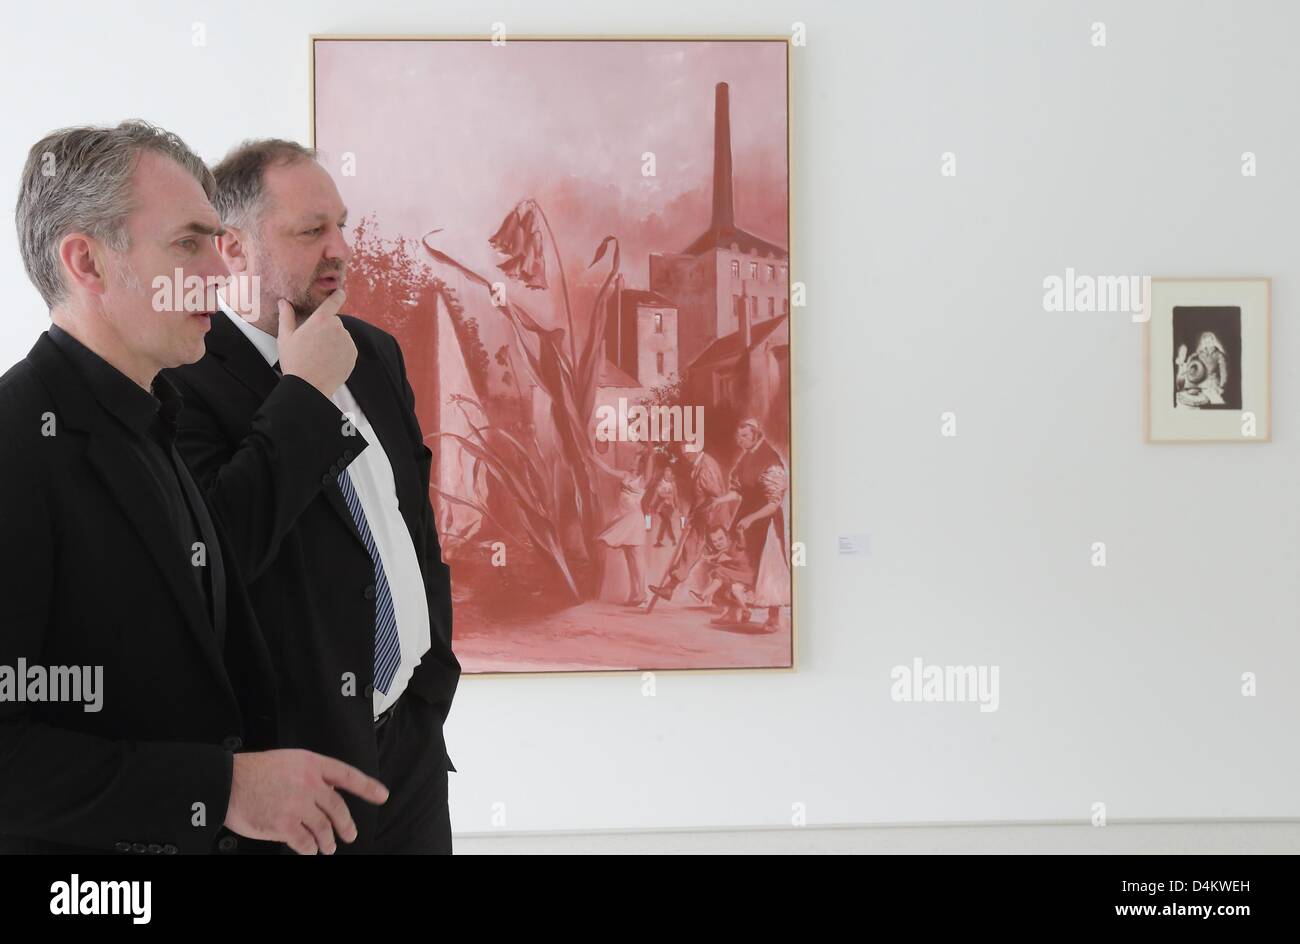 German painter Neo Rauch (L) and mayor of  Aschersleben Andreas Michelmann walk through the graphics exhibition Neo Rauch in Aschersleben, Germany, 15 March 2013. The second exhibition at Neo Rauch Graphic Foundation will open its doors on 17 September 2013. Rauch spent his childhood and youth in Aschersleben. Photo: JENS WOLF Stock Photo